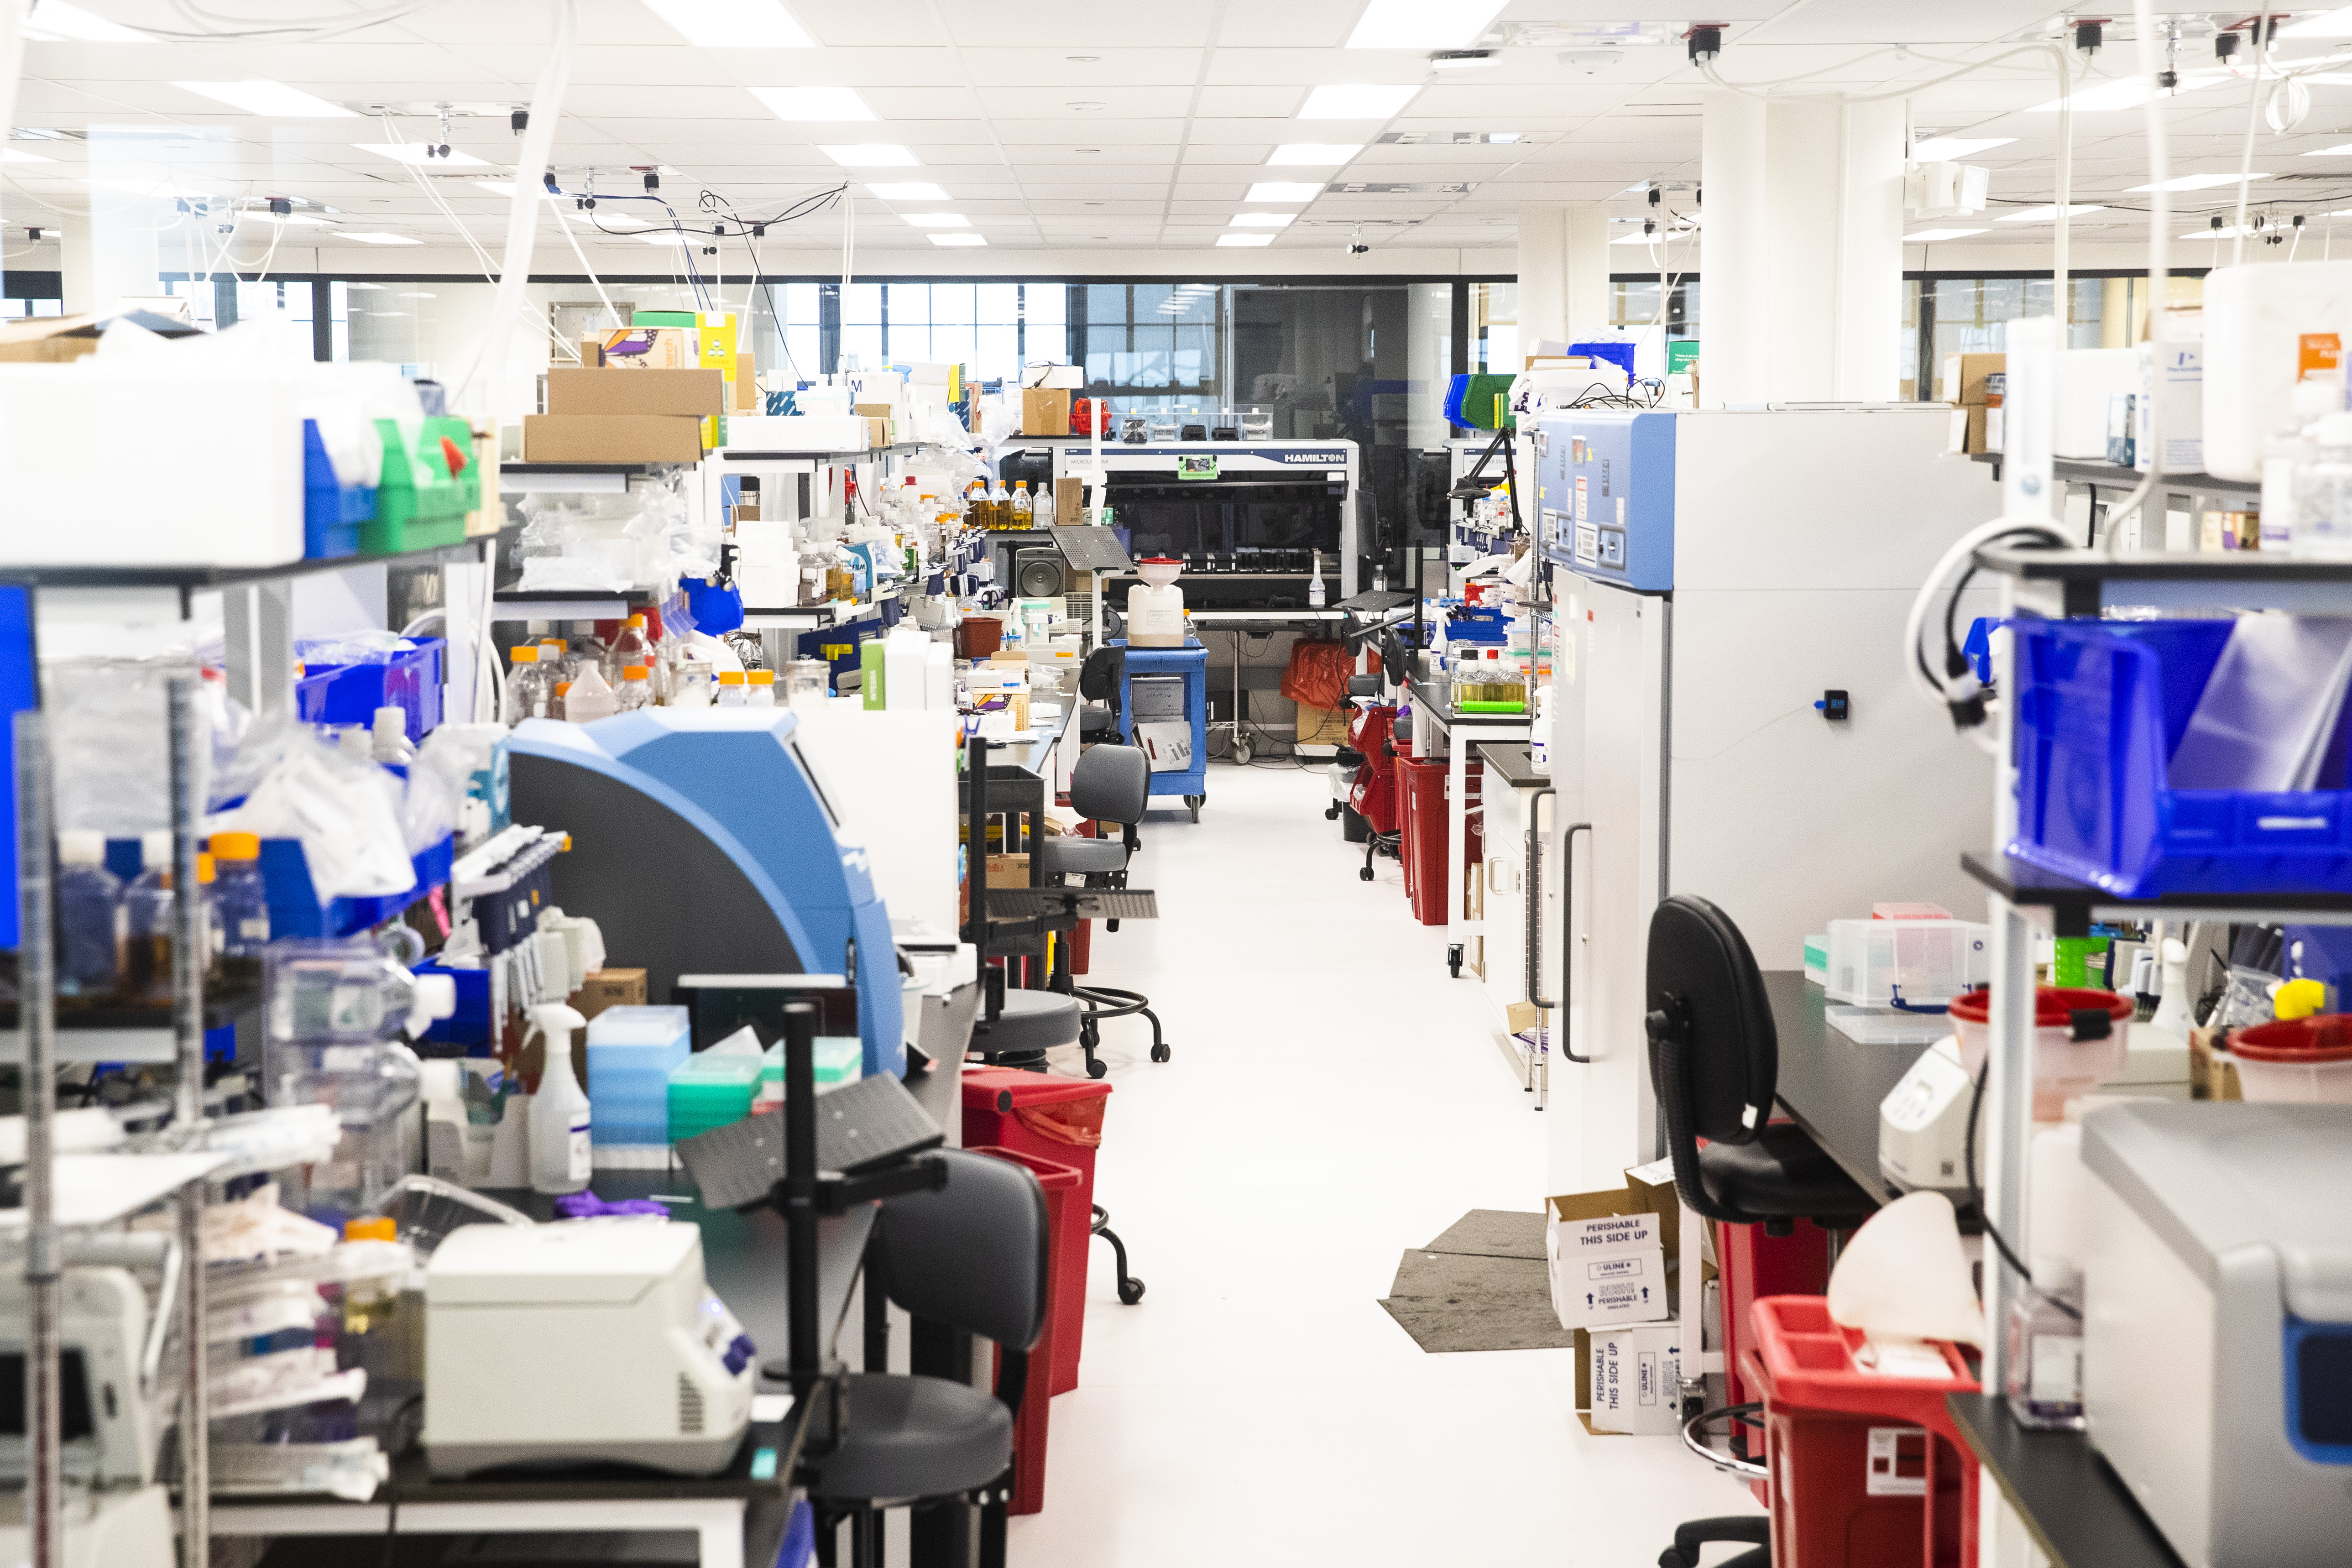 A brightly lit, white lab room with rows of desks and lots of scientific equipment and storage.